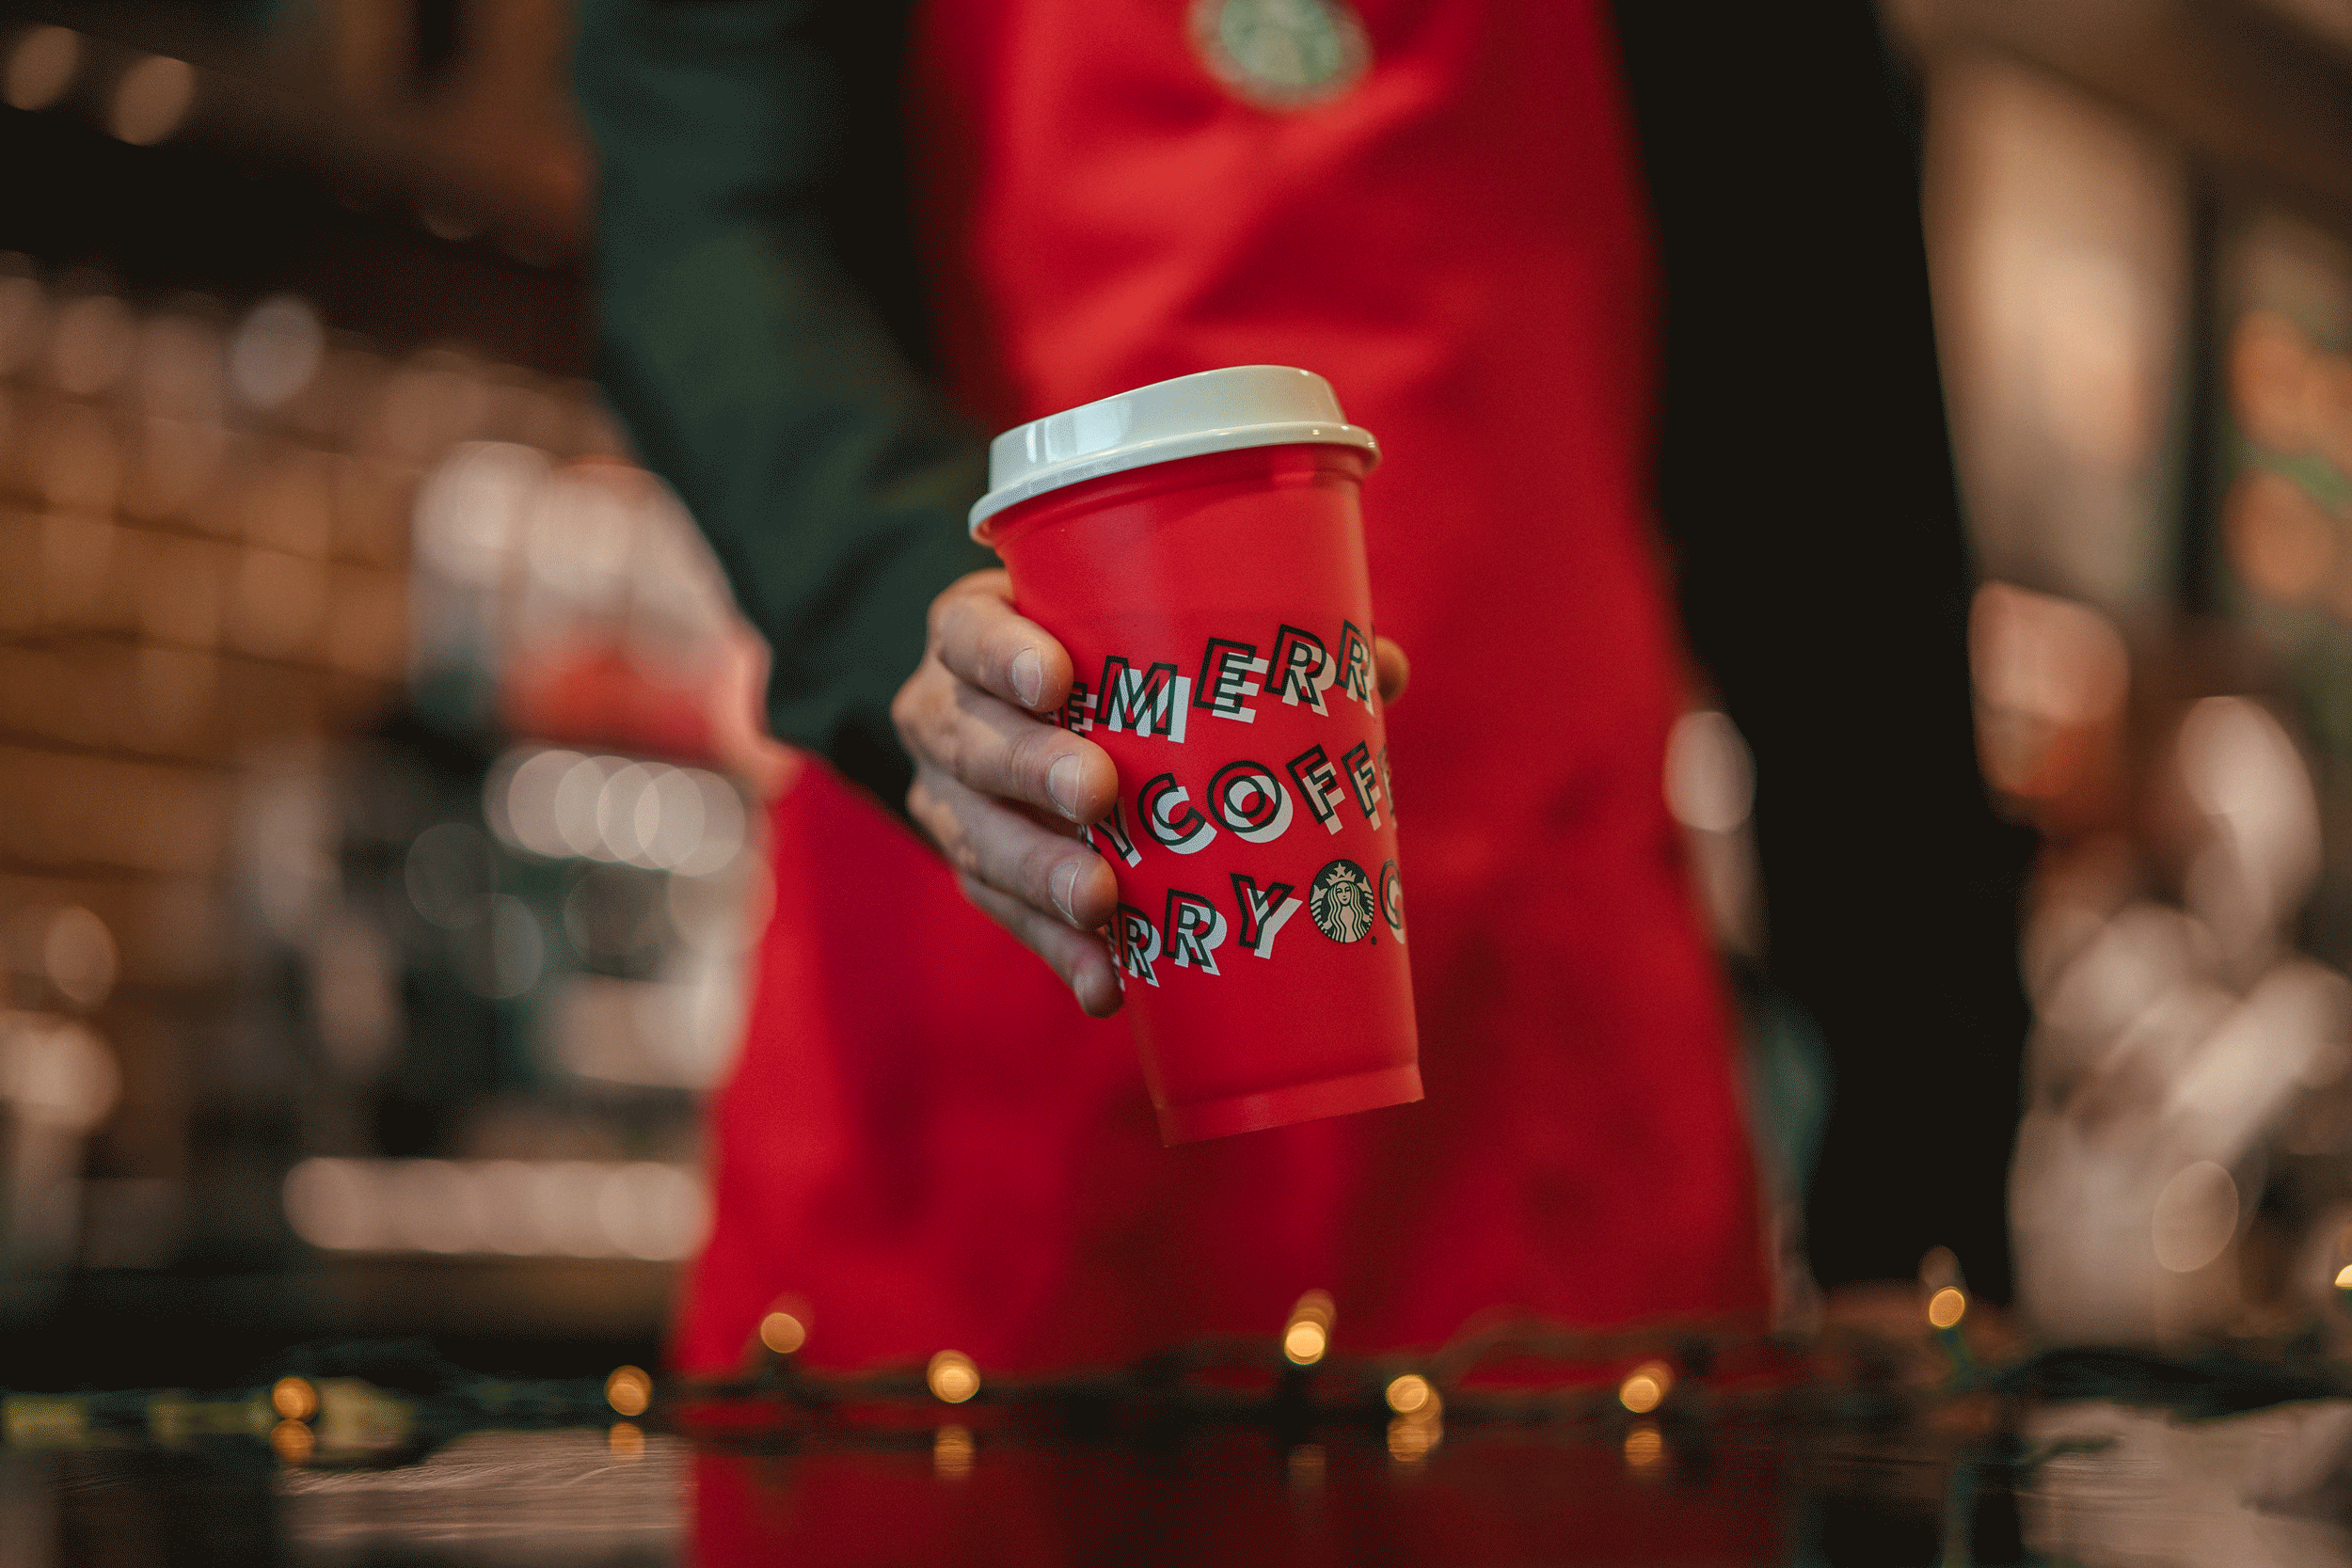 Starbucks red cups arrive today -- Here's why travelers might want